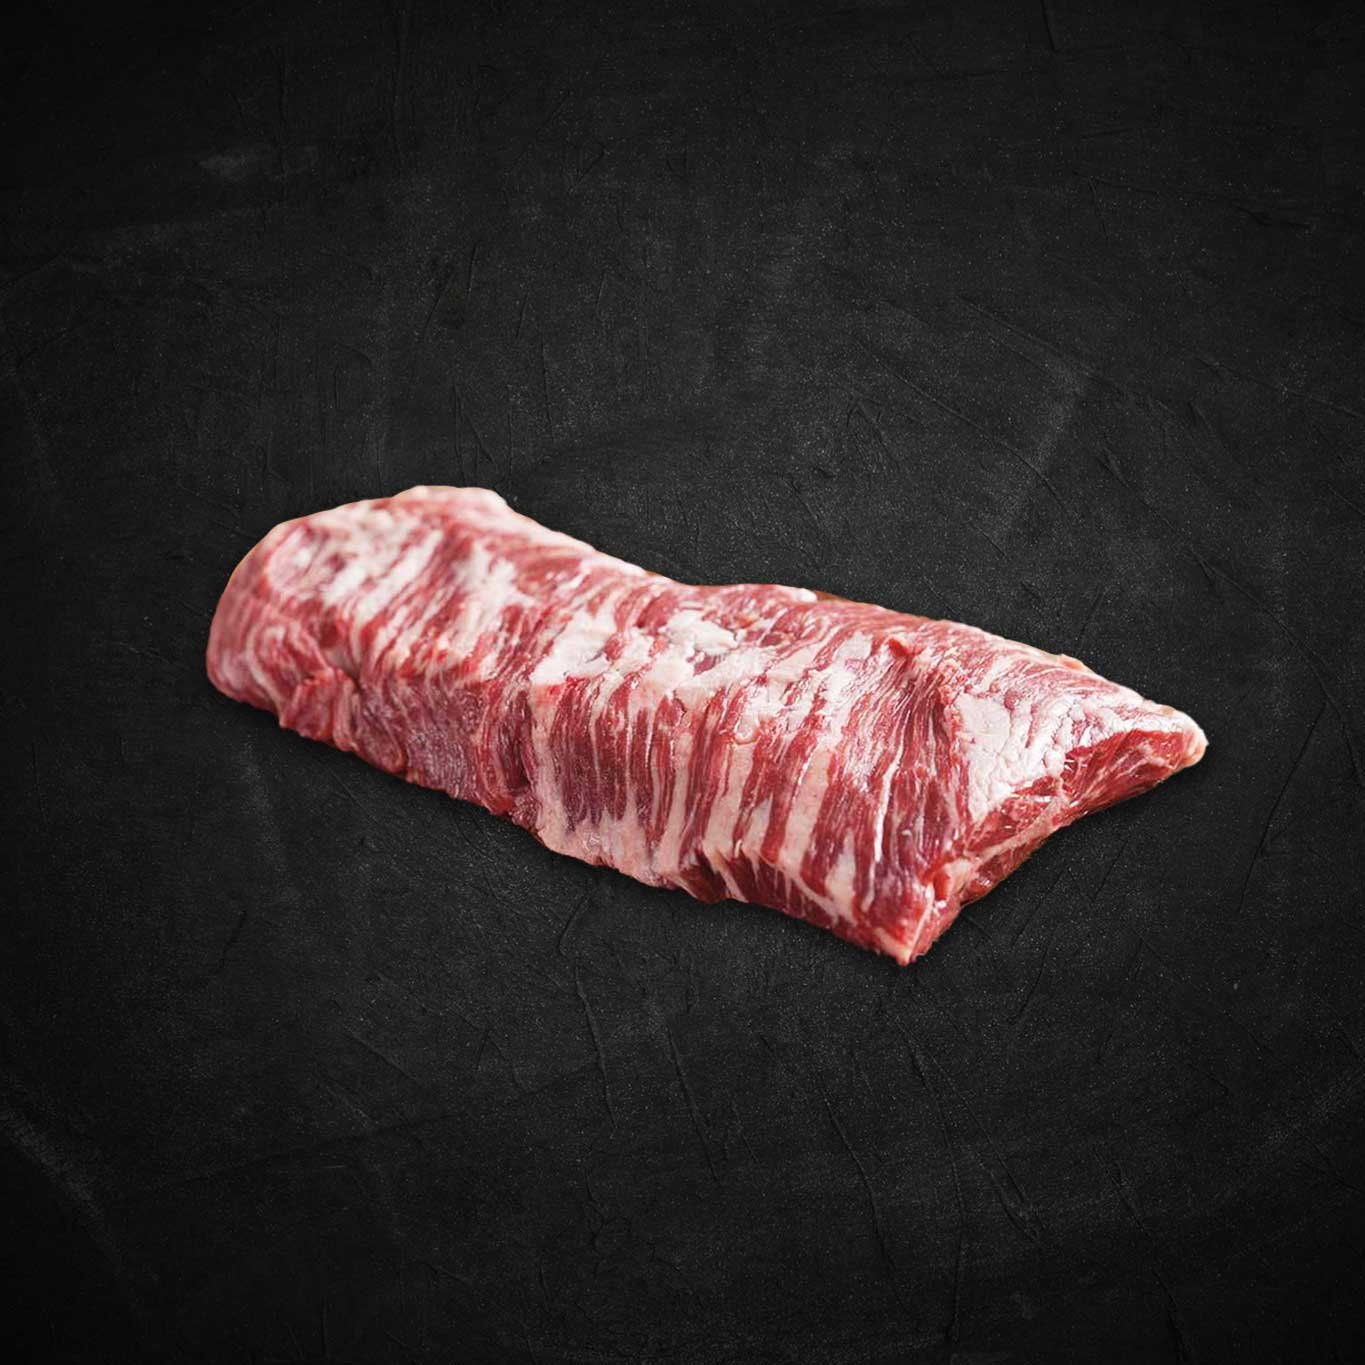 Butcher's Guide: What is a Skirt Steak?